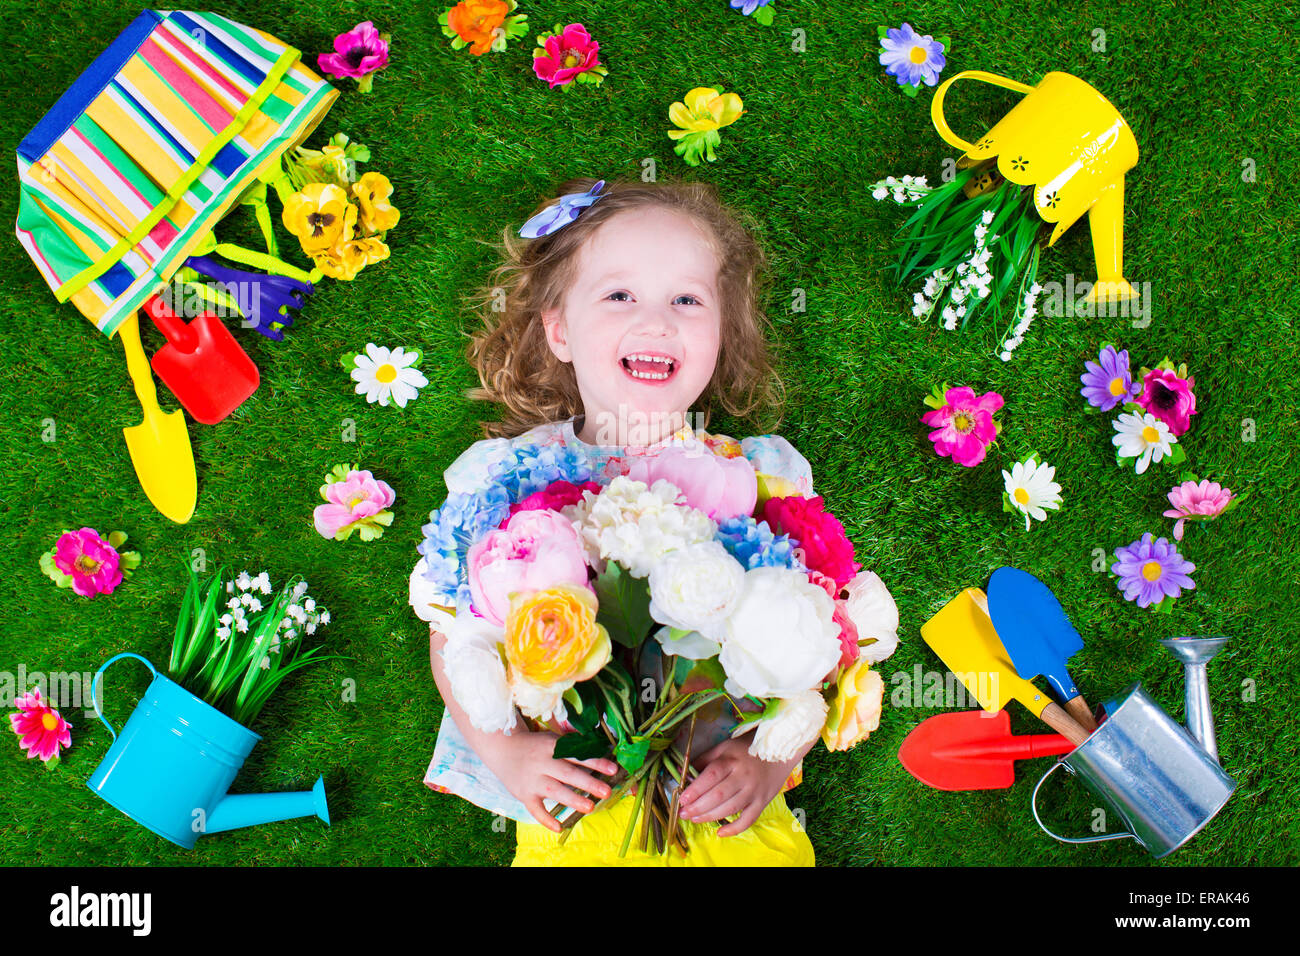 Kids gardening. Children with garden tools. Child with watering can and shovel. Little kid watering flowers. Stock Photo